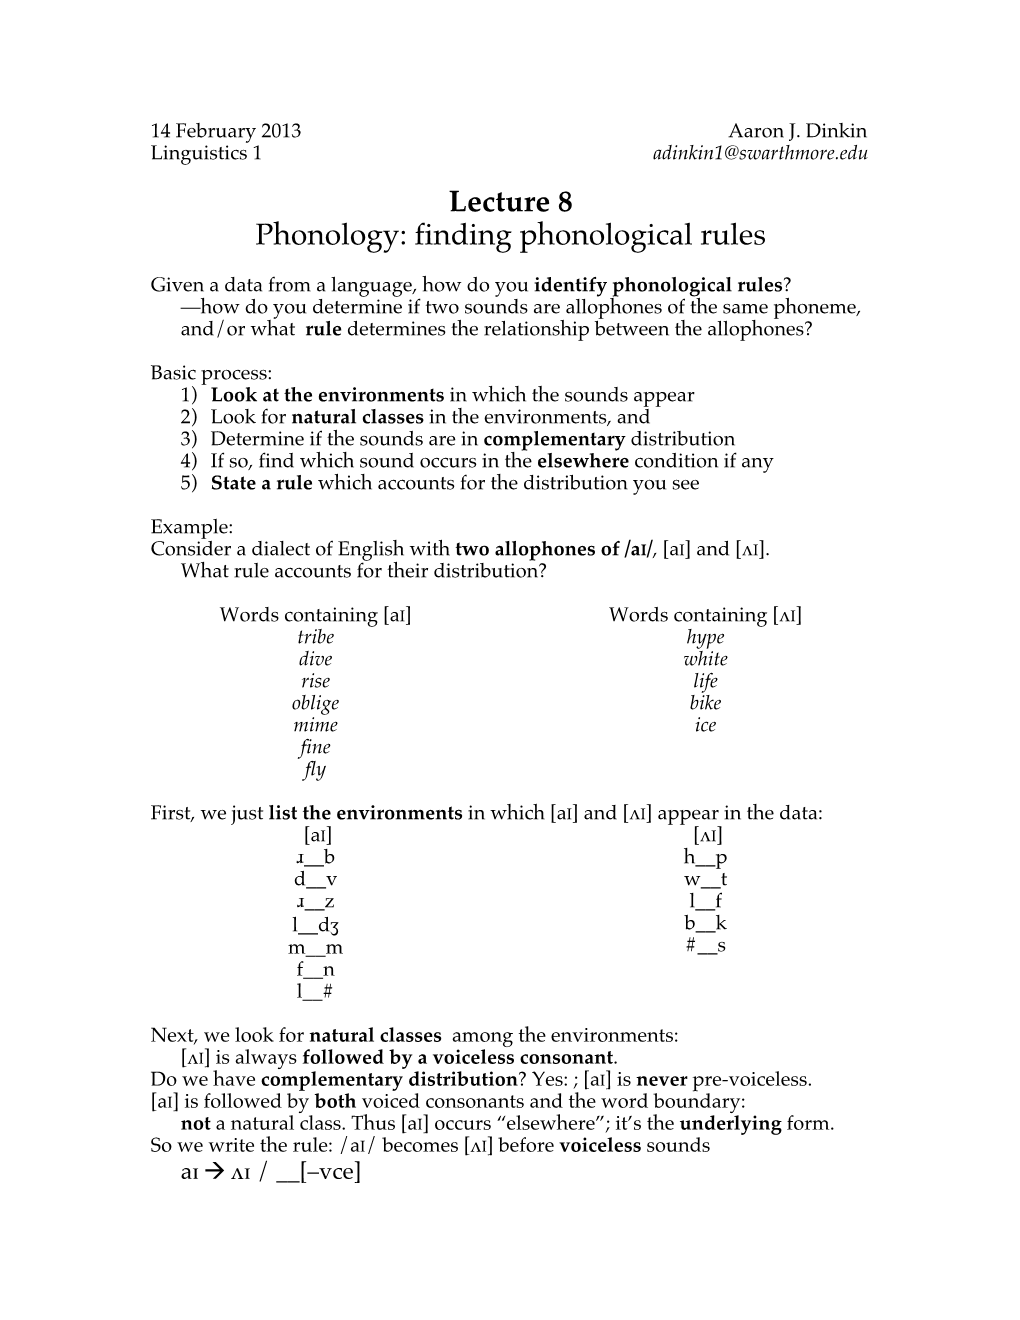 Finding Phonological Rules